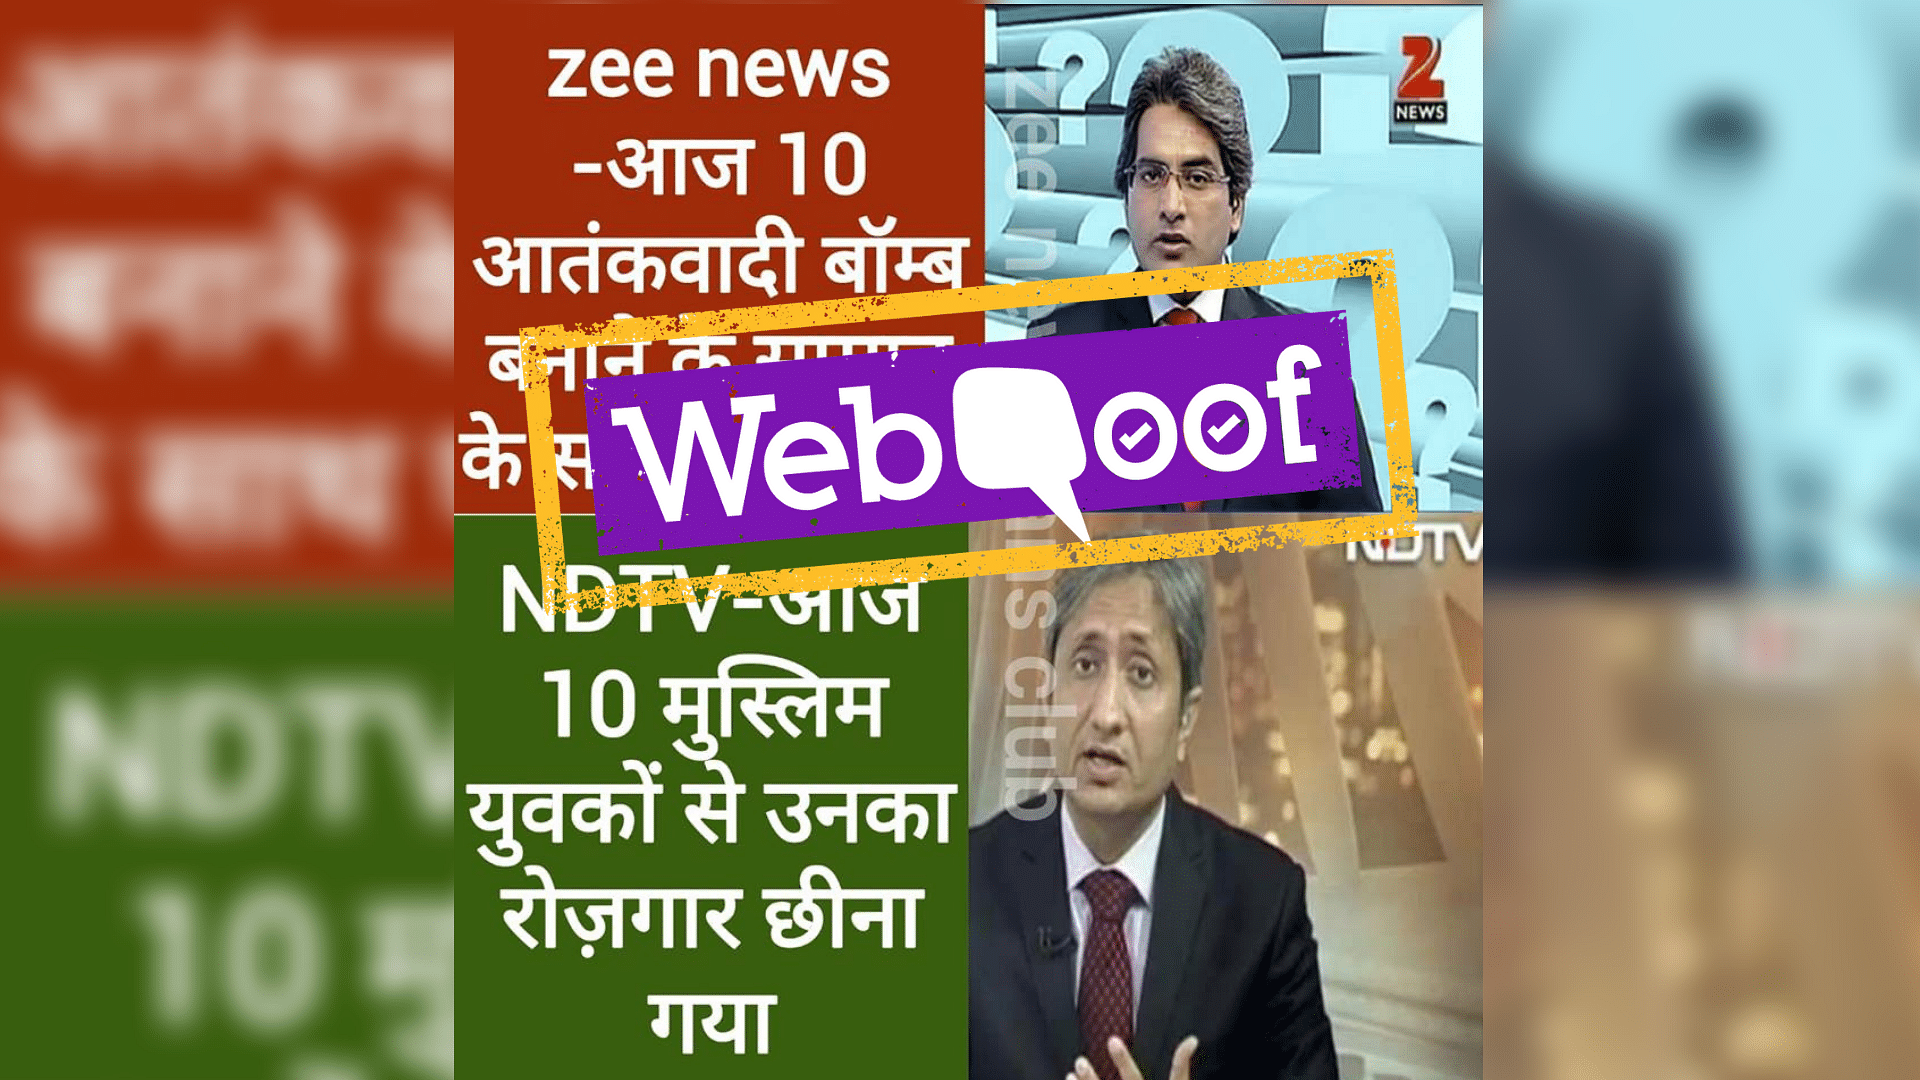 A viral post falsely claims that Ravish Kumar said that 10 muslims lost their jobs in context to the NIA arrests on 26 December.